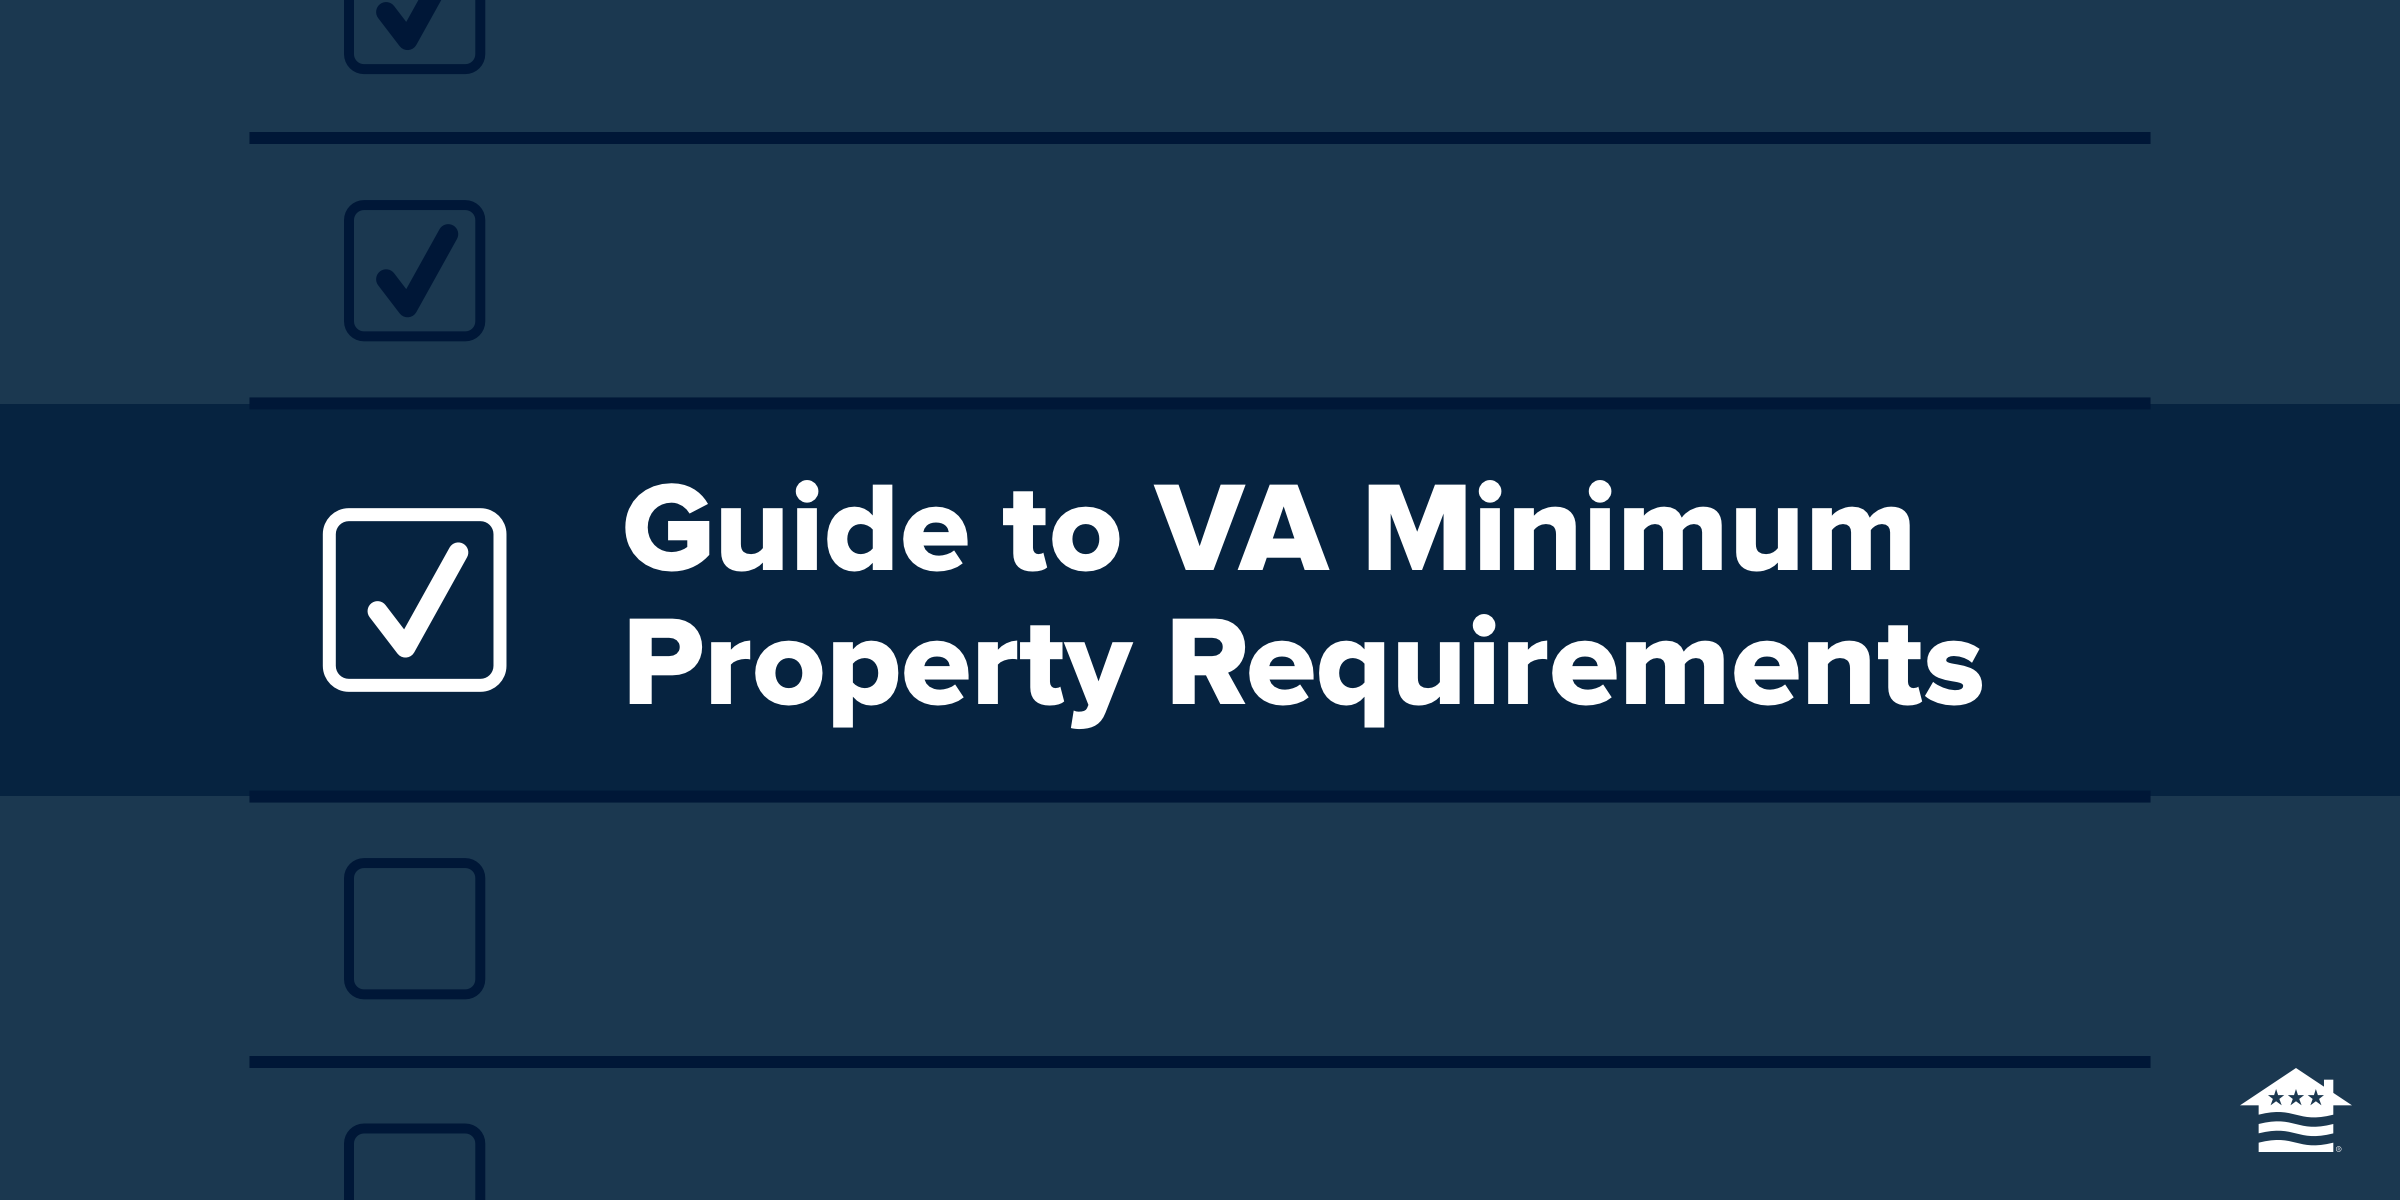 Check list with an entry titled "Guide to VA Minimum Property Requirements.